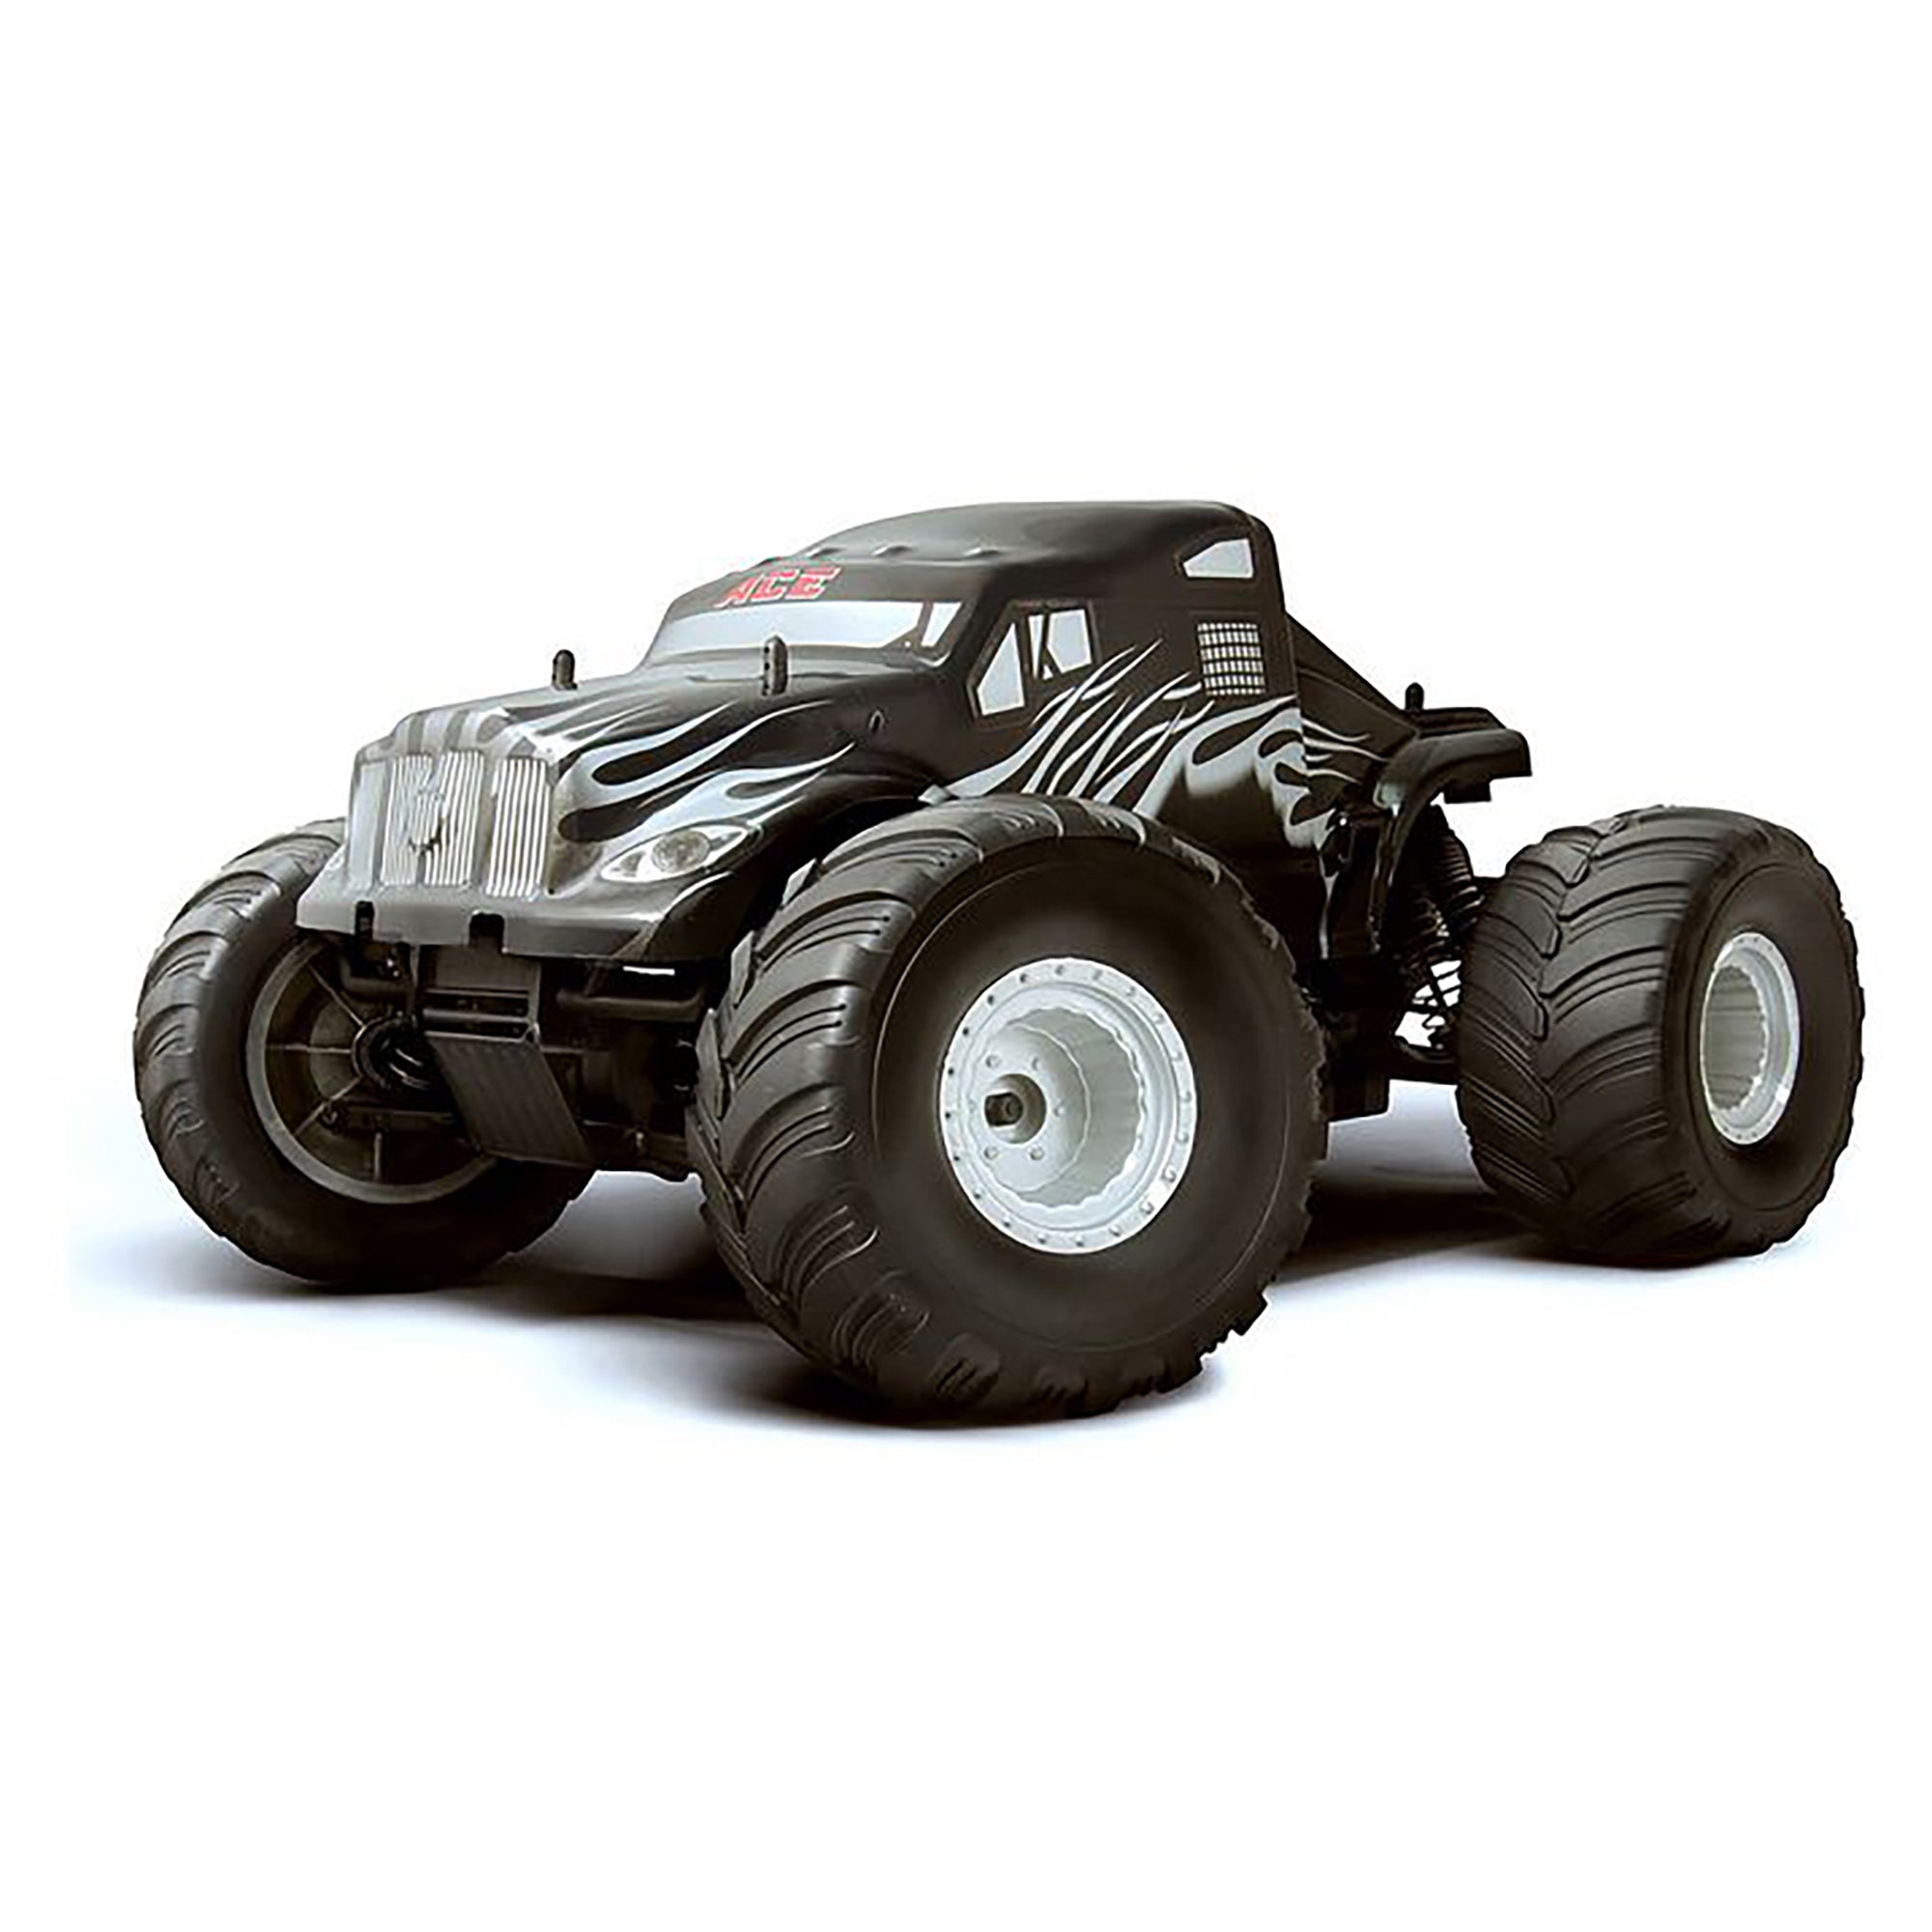 HSP Racing ACE Monster Truck Silver Flame 2.4GHz 1/10 Brushless 4WD Off Road RTR RC Truck